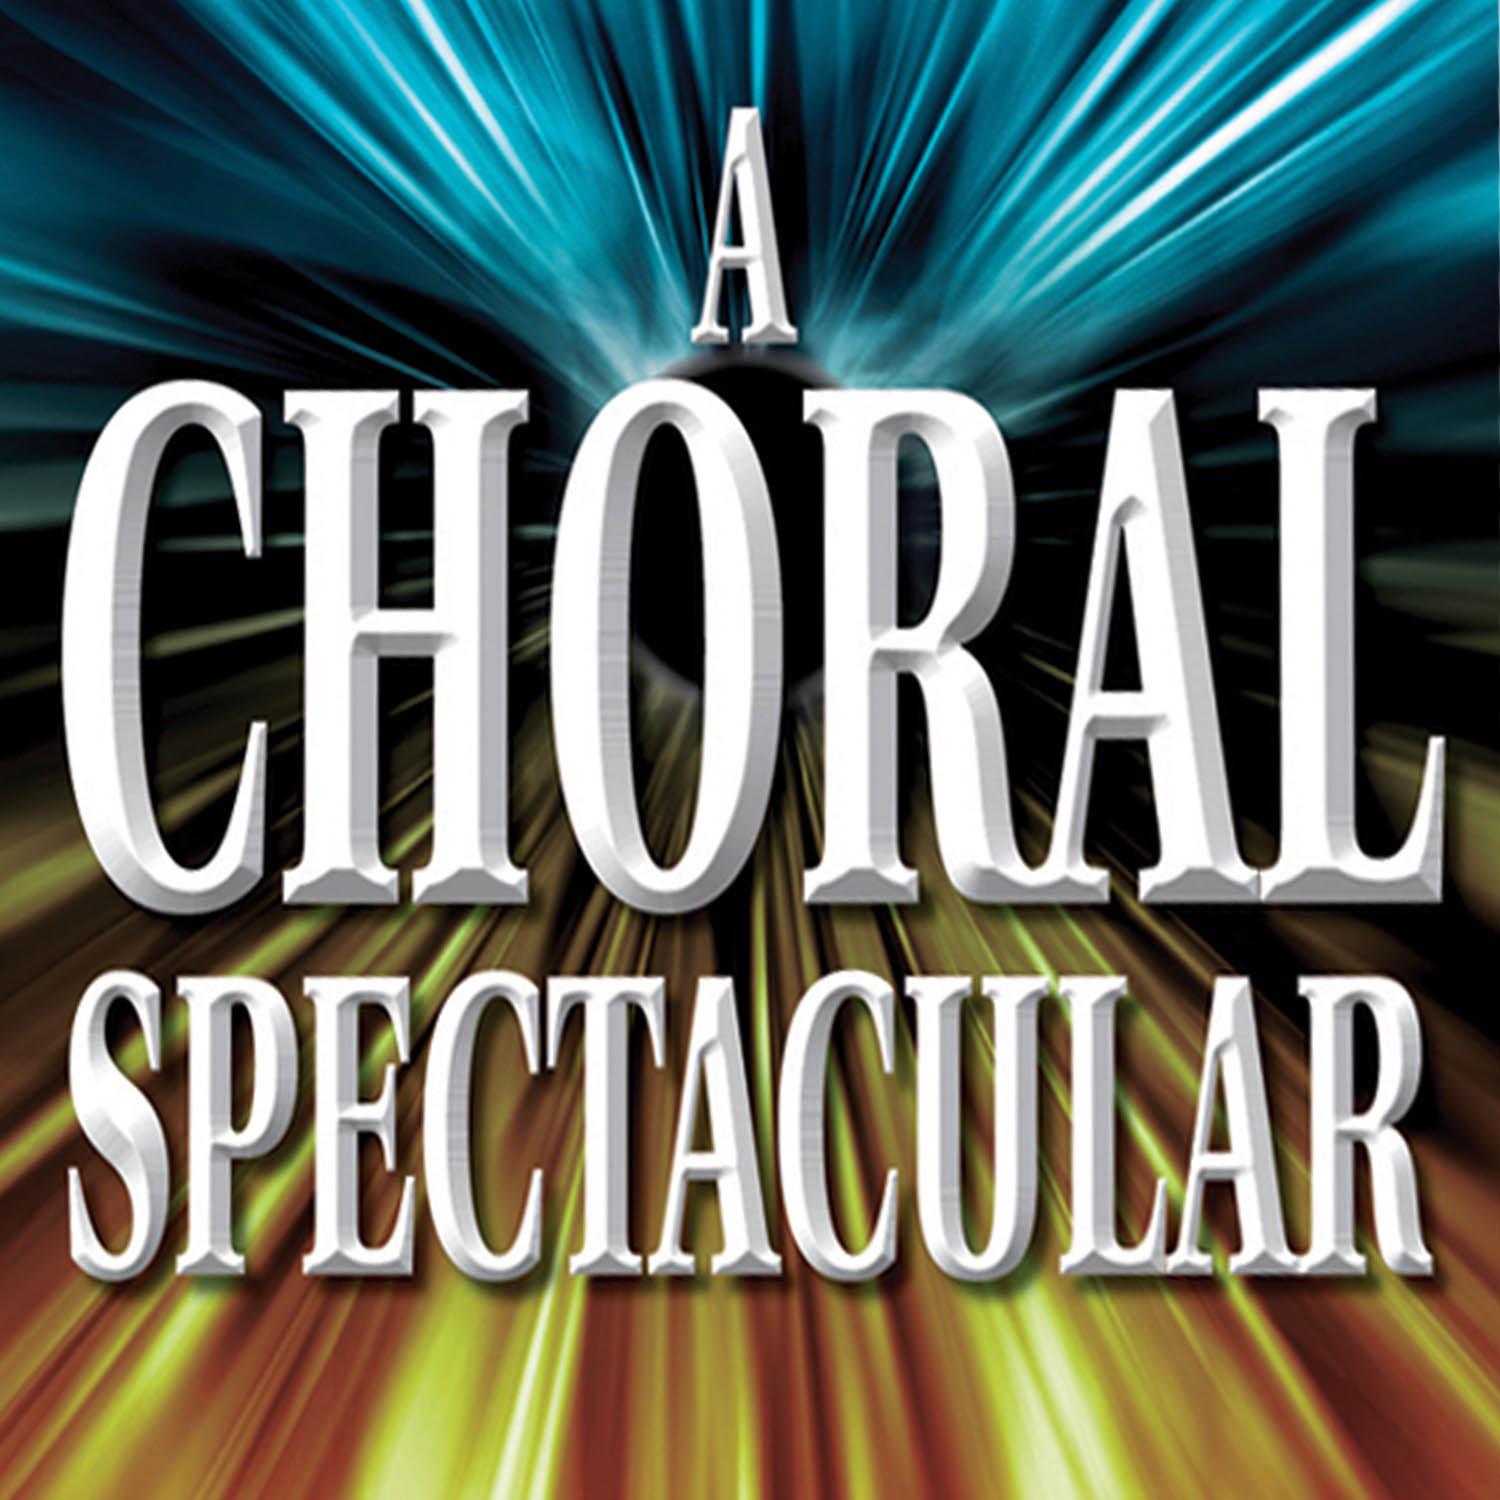 A Choral Spectacular: The Ultimate Favourite Choirs Collection. Popular, Magical Choral Favourites from 300 Years